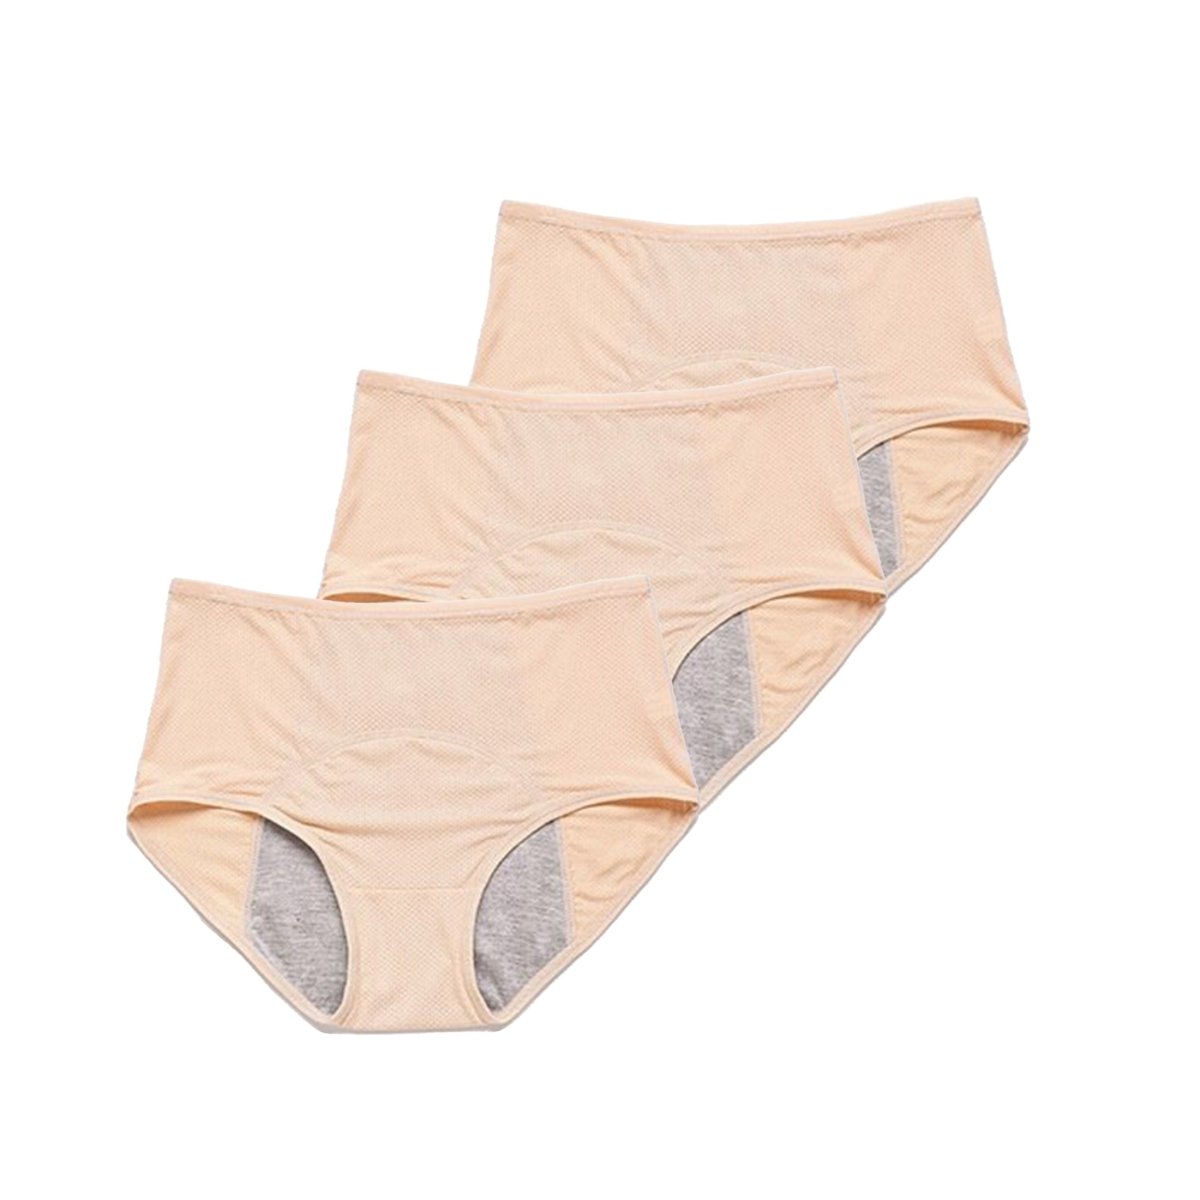 Buy Adira, Women Leak Proof Underwear, Made With Hi-Tech Soft Cotton  Crotch, Dry & Hygienic Everyday Discharge, Leakproof & Breathable, Full  Coverage, Pack Of 3